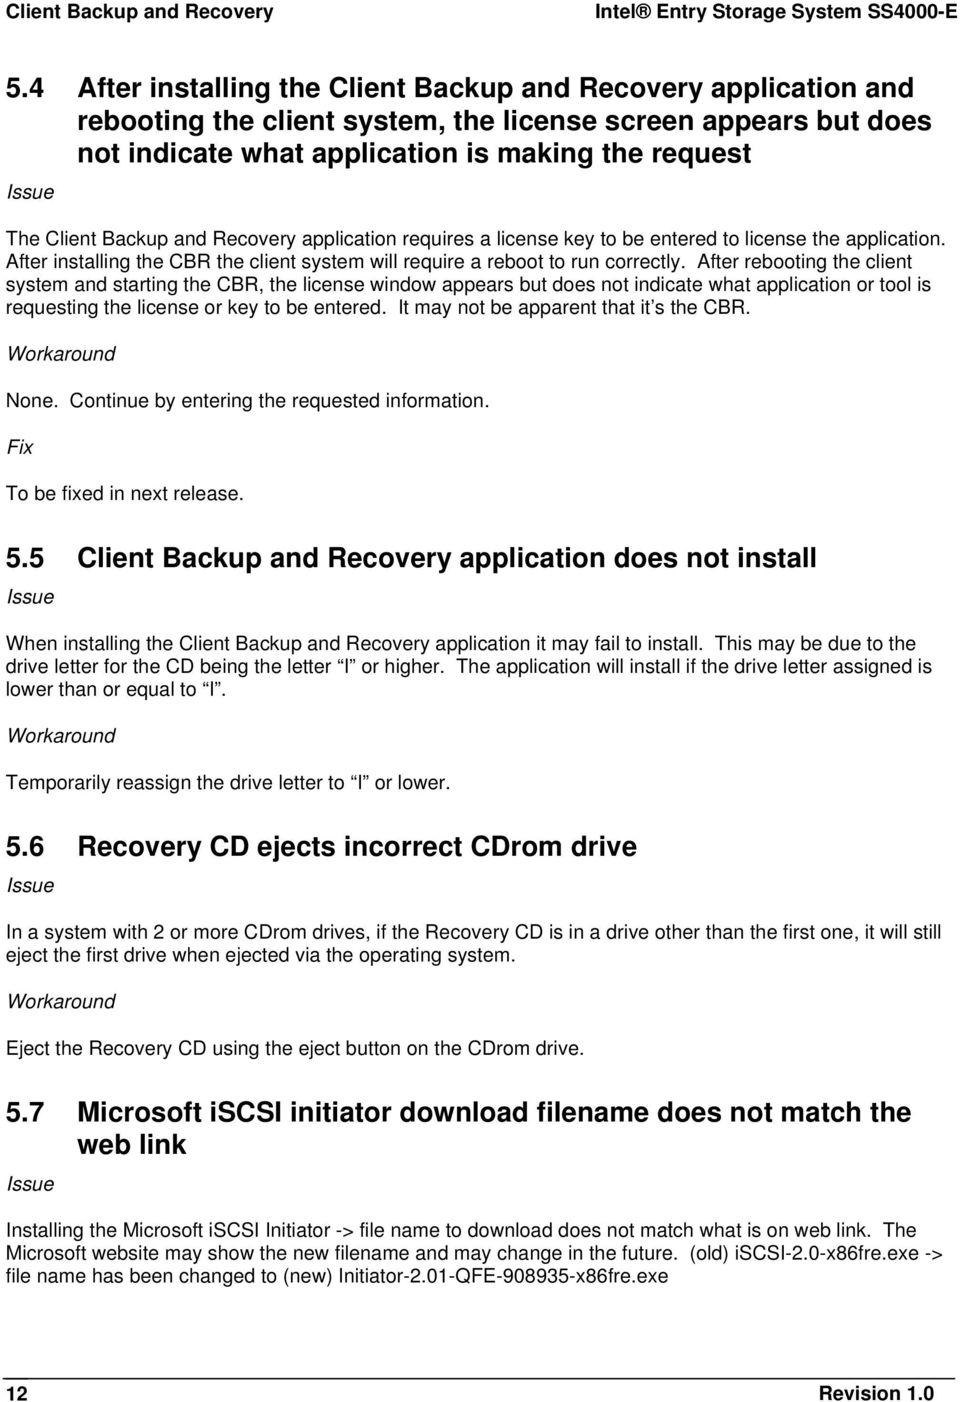 Backup and Recovery application requires a license key to be entered to license the application. After installing the CBR the client system will require a reboot to run correctly.